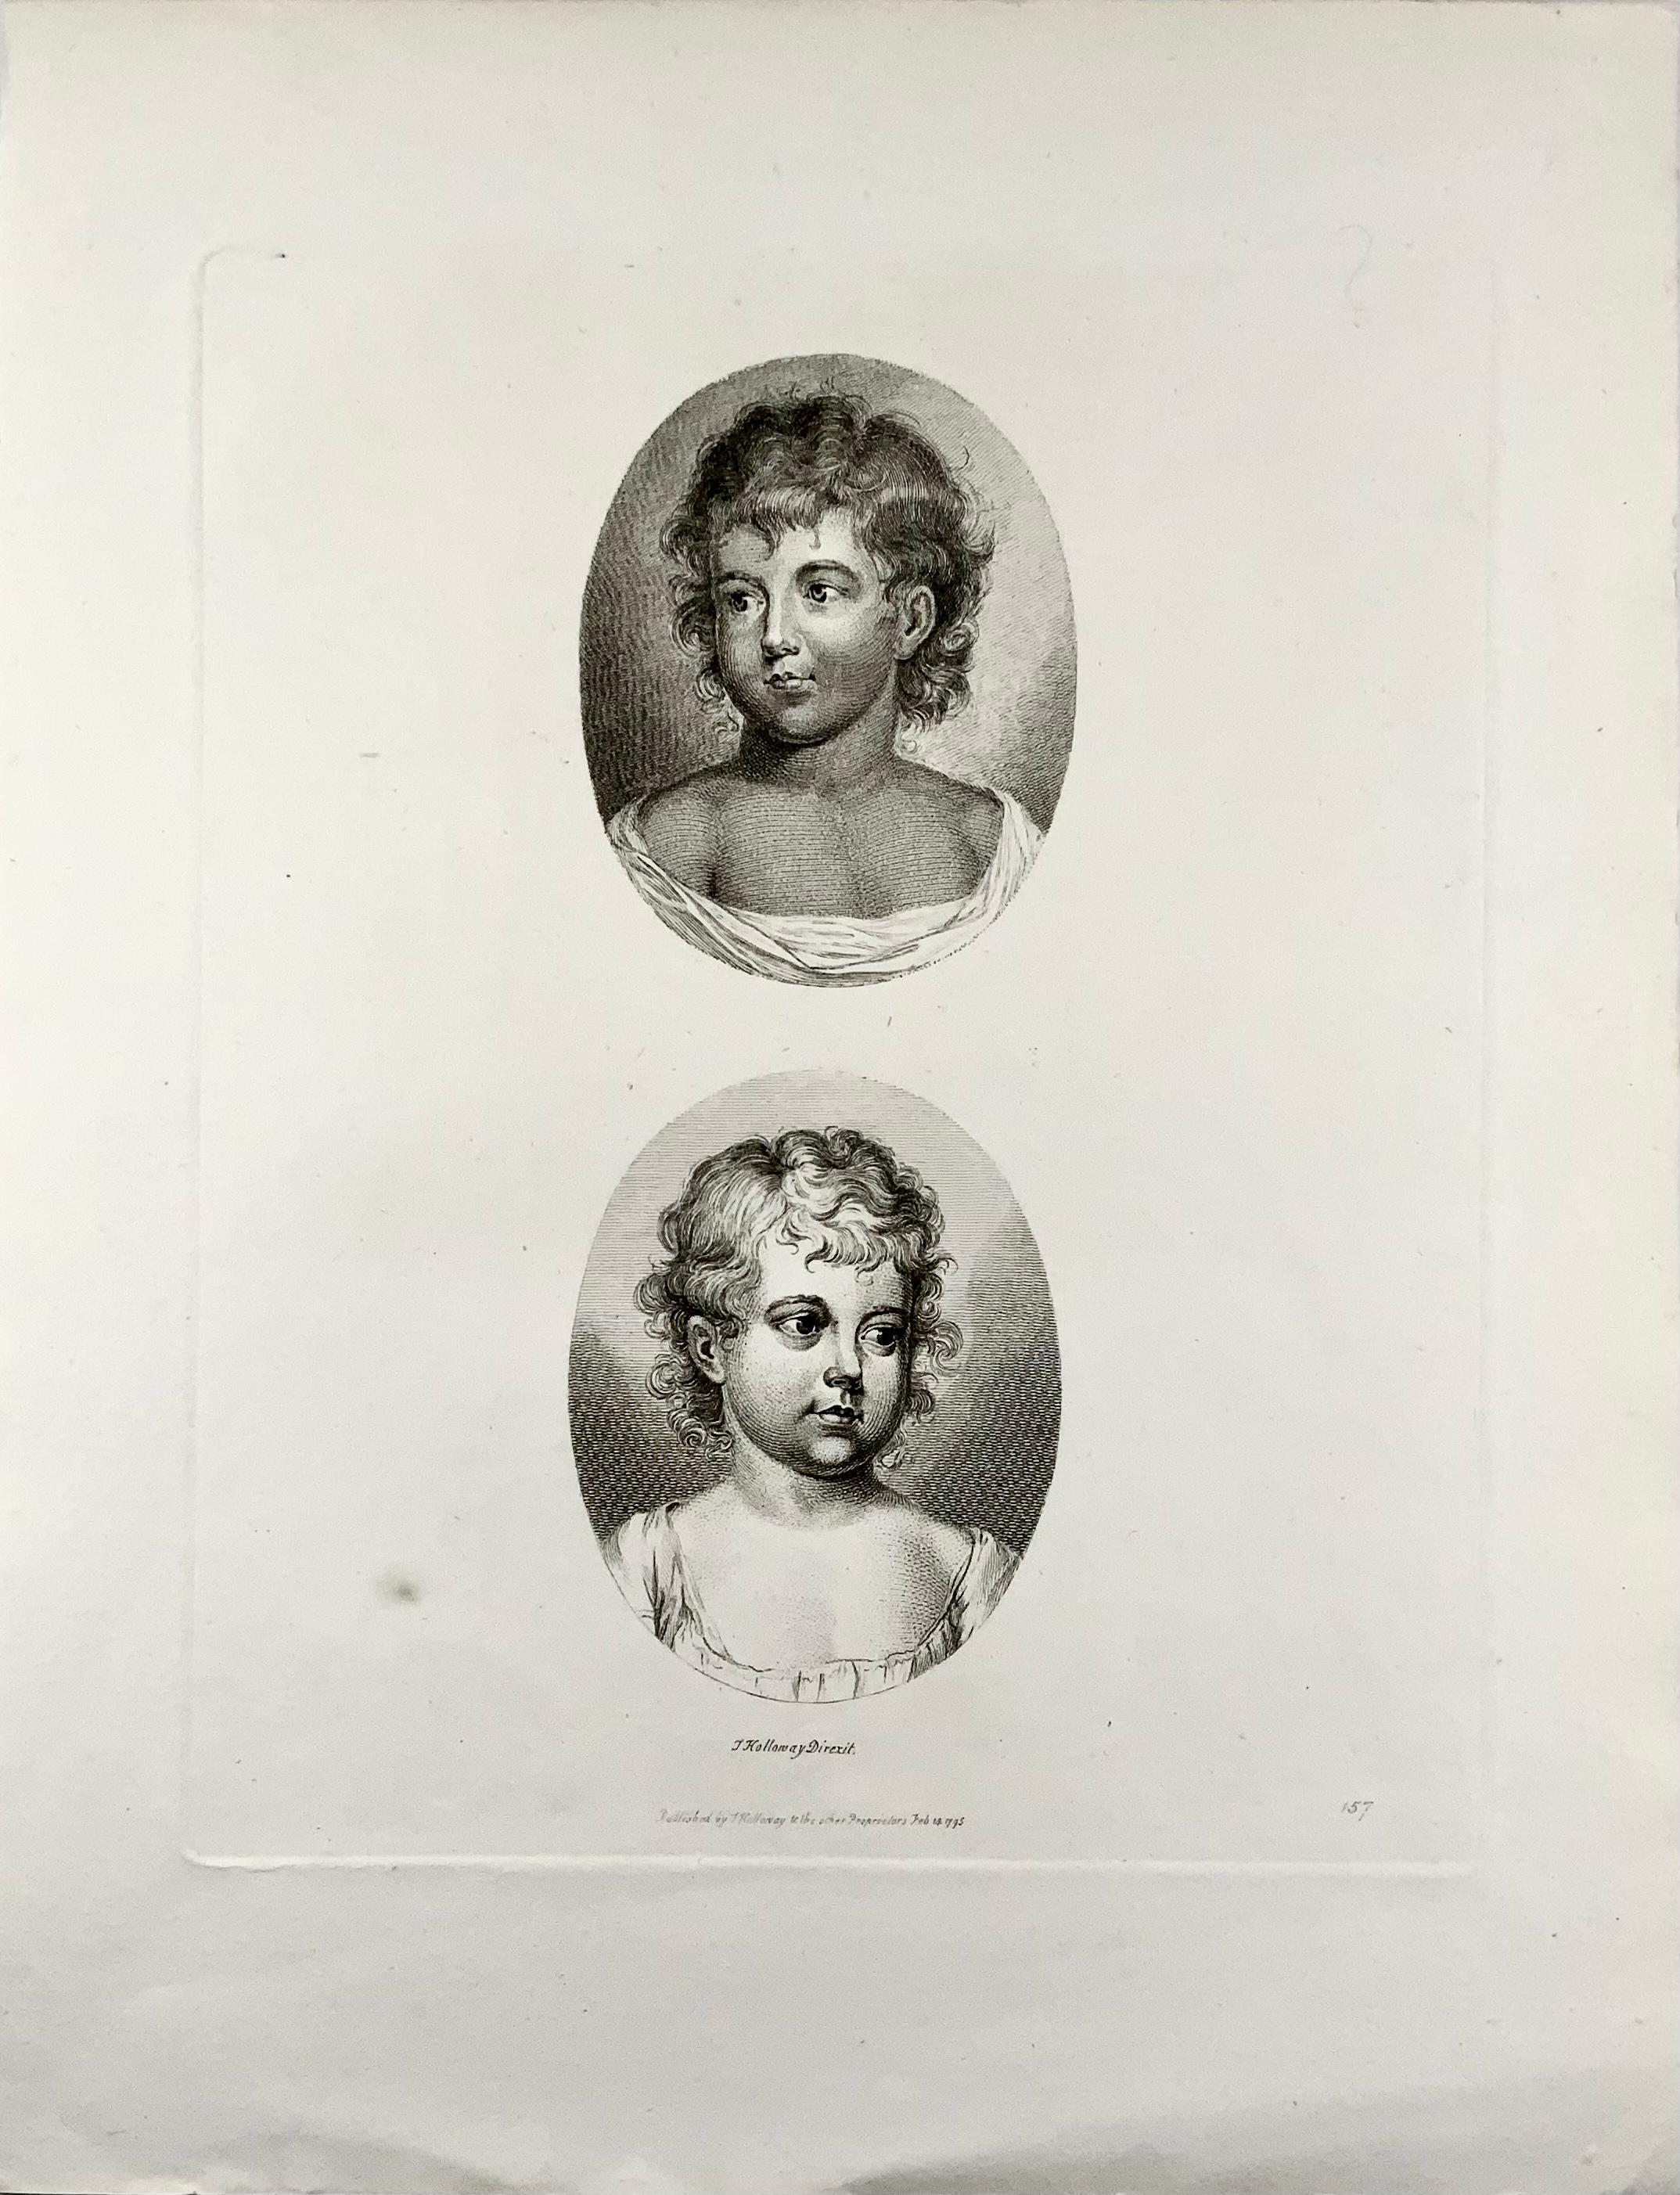 Holloway, Thomas, 1748-1827

Holloway was apprenticed to a seal engraver named Stent at a young age. He went on to study engraving at the Royal Academy beginning in 1773. He became a court engraver in 1792.

33.8 x 27 cm

2 fine portraits on